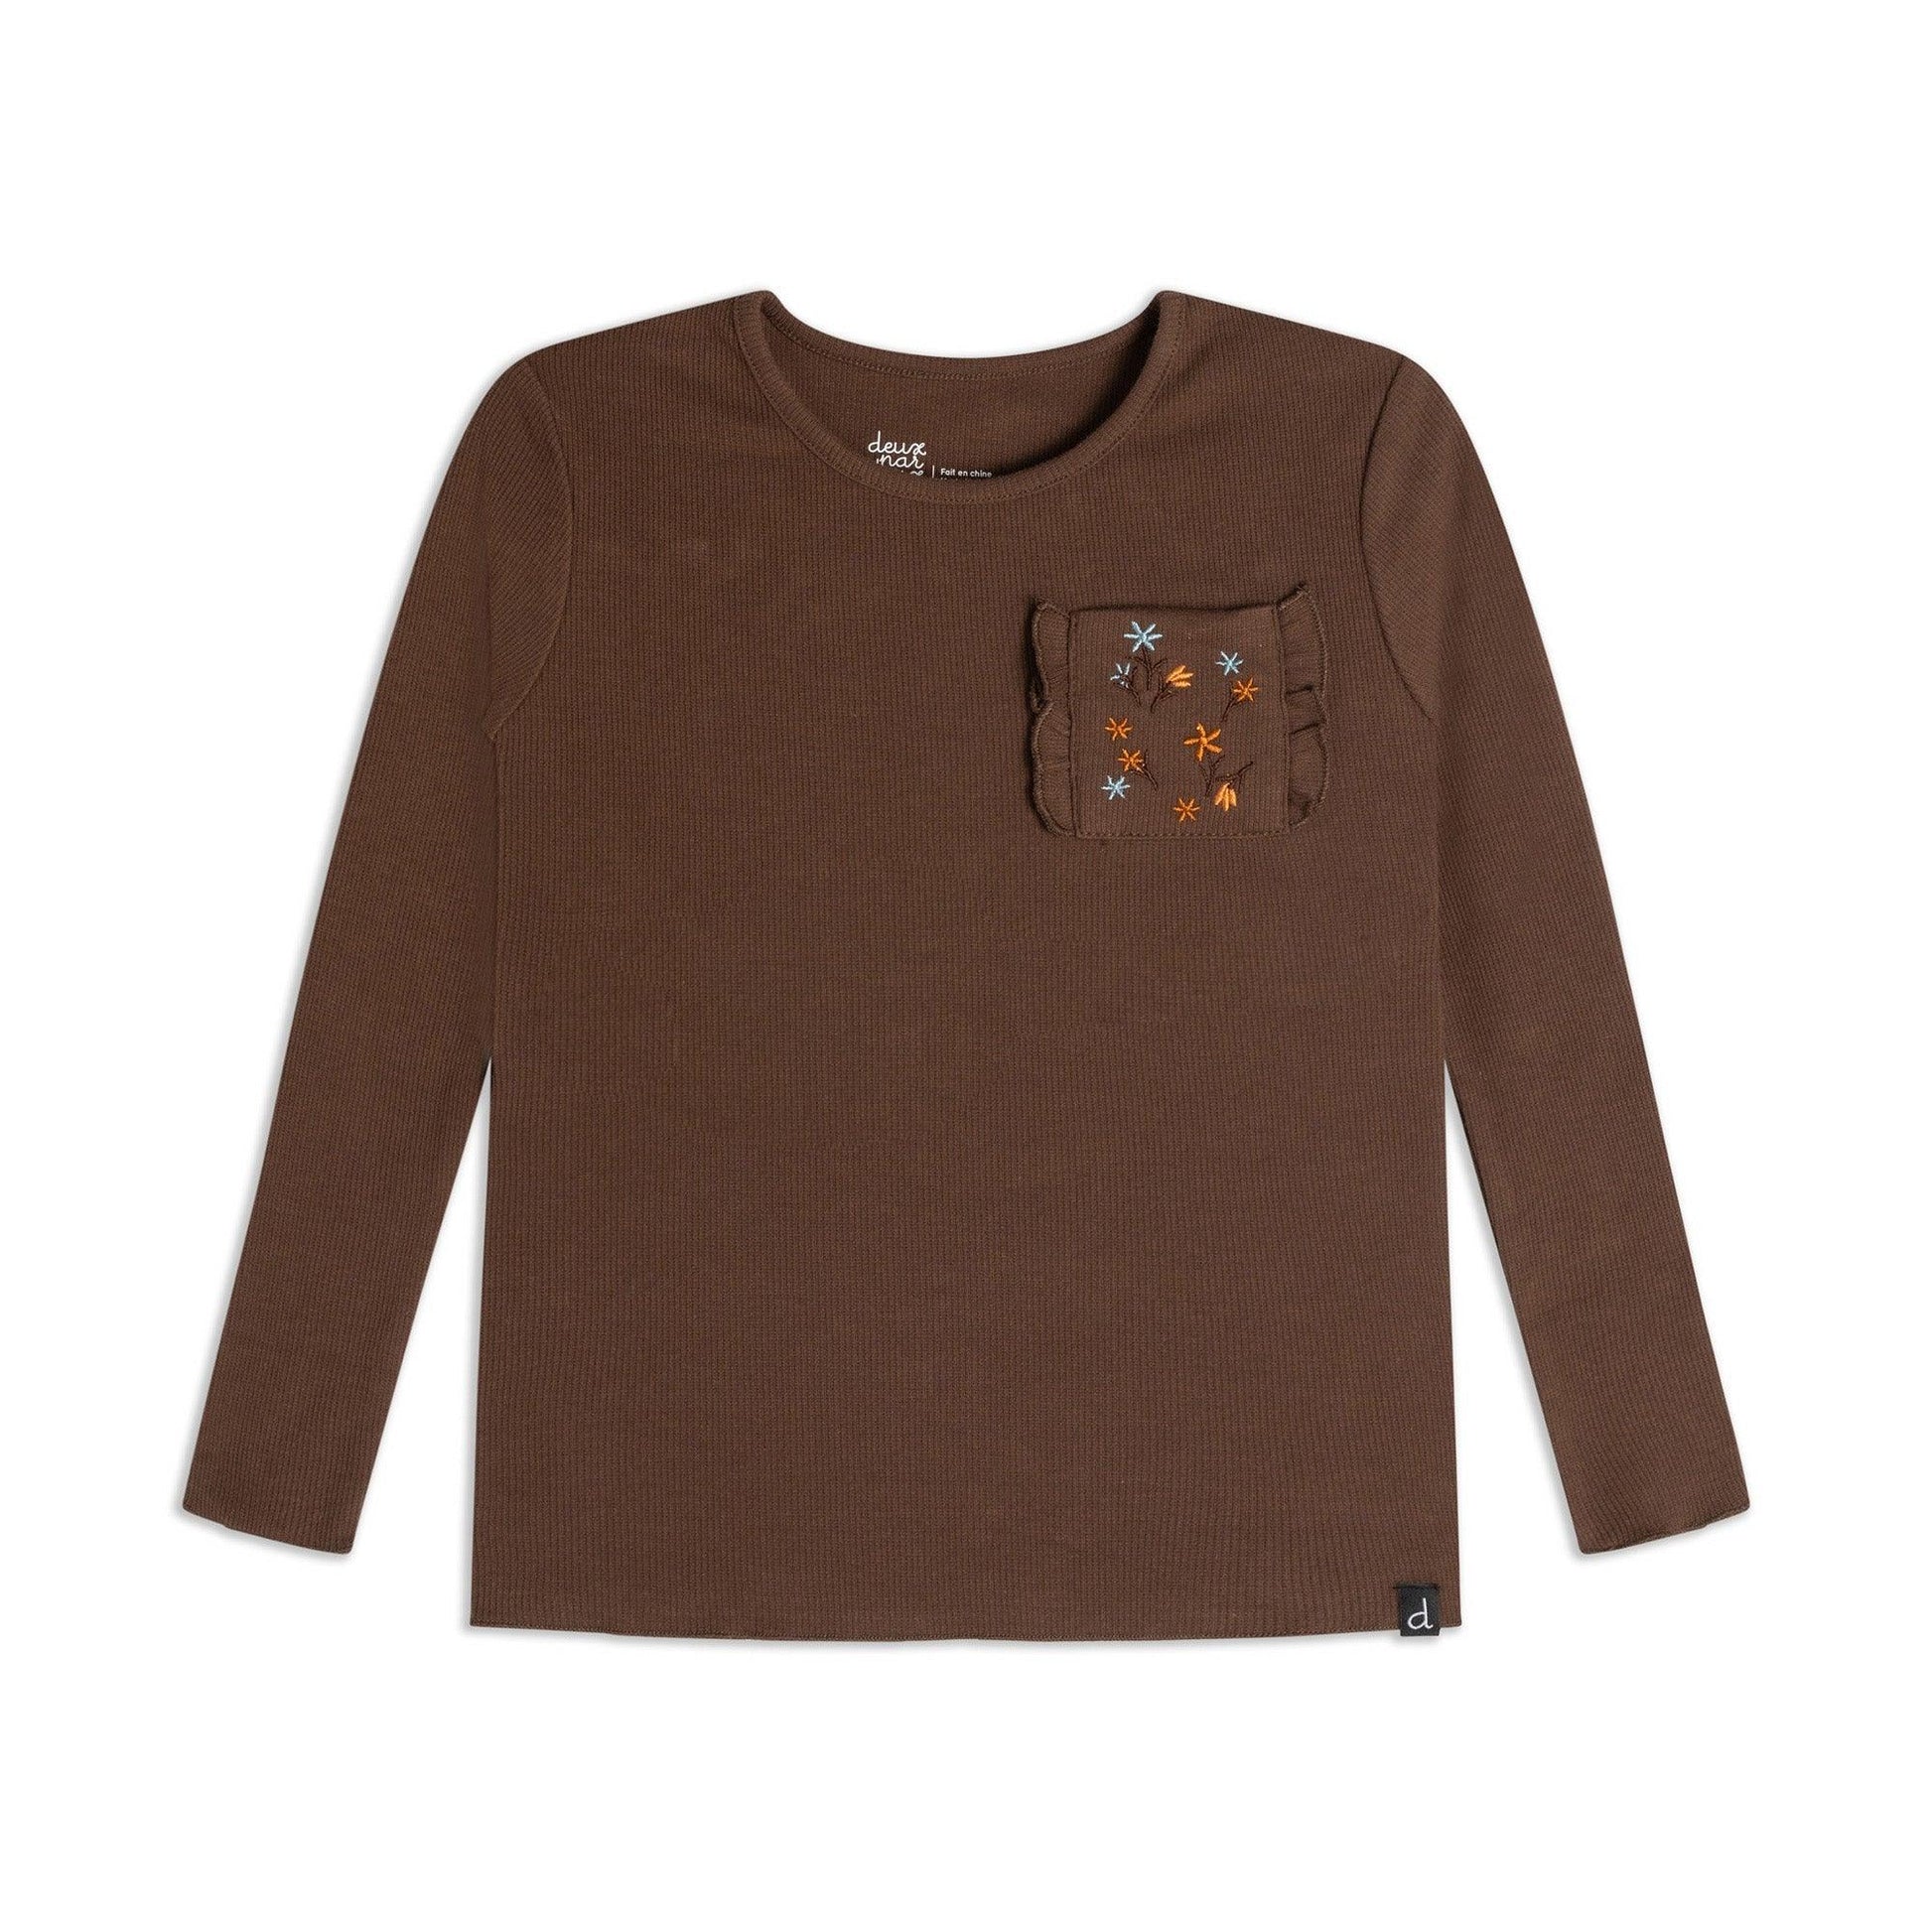 Long Sleeve Rib Top With Pocket Brown - CatchMySwag